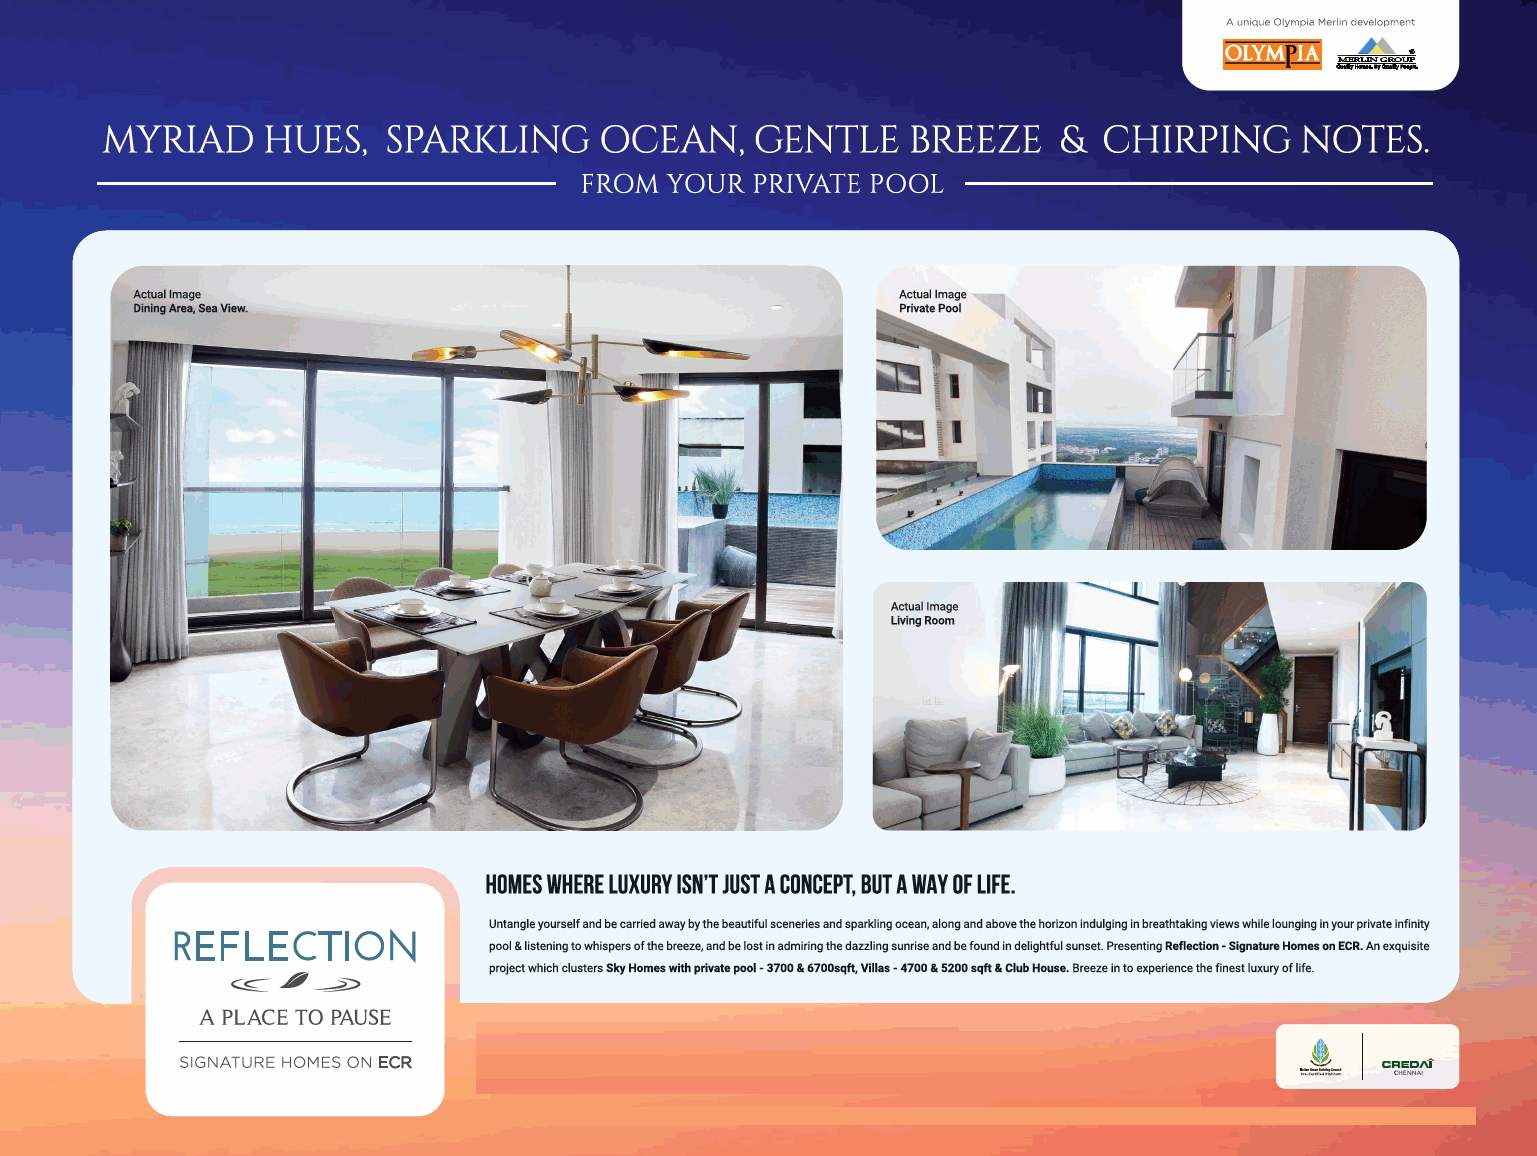 Untangle yourself & be carried away by the beautiful sceneries at Olympia Merlin Reflection in Chennai